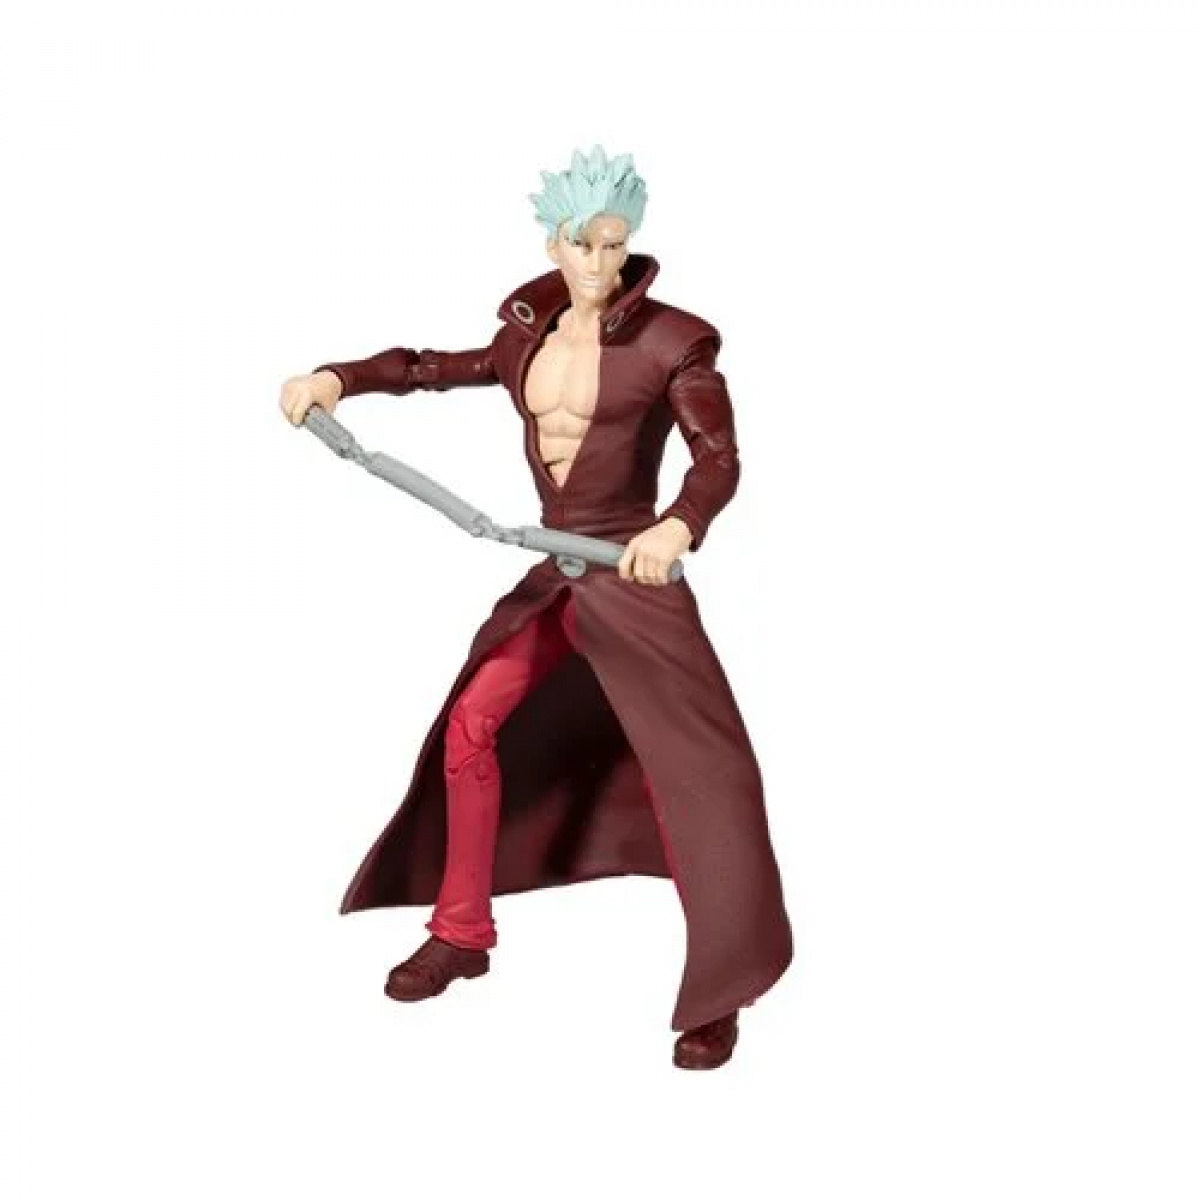 Shop The Seven Deadly Sins Wave 1 Ban 7-Inch Scale Action Figure anime 4